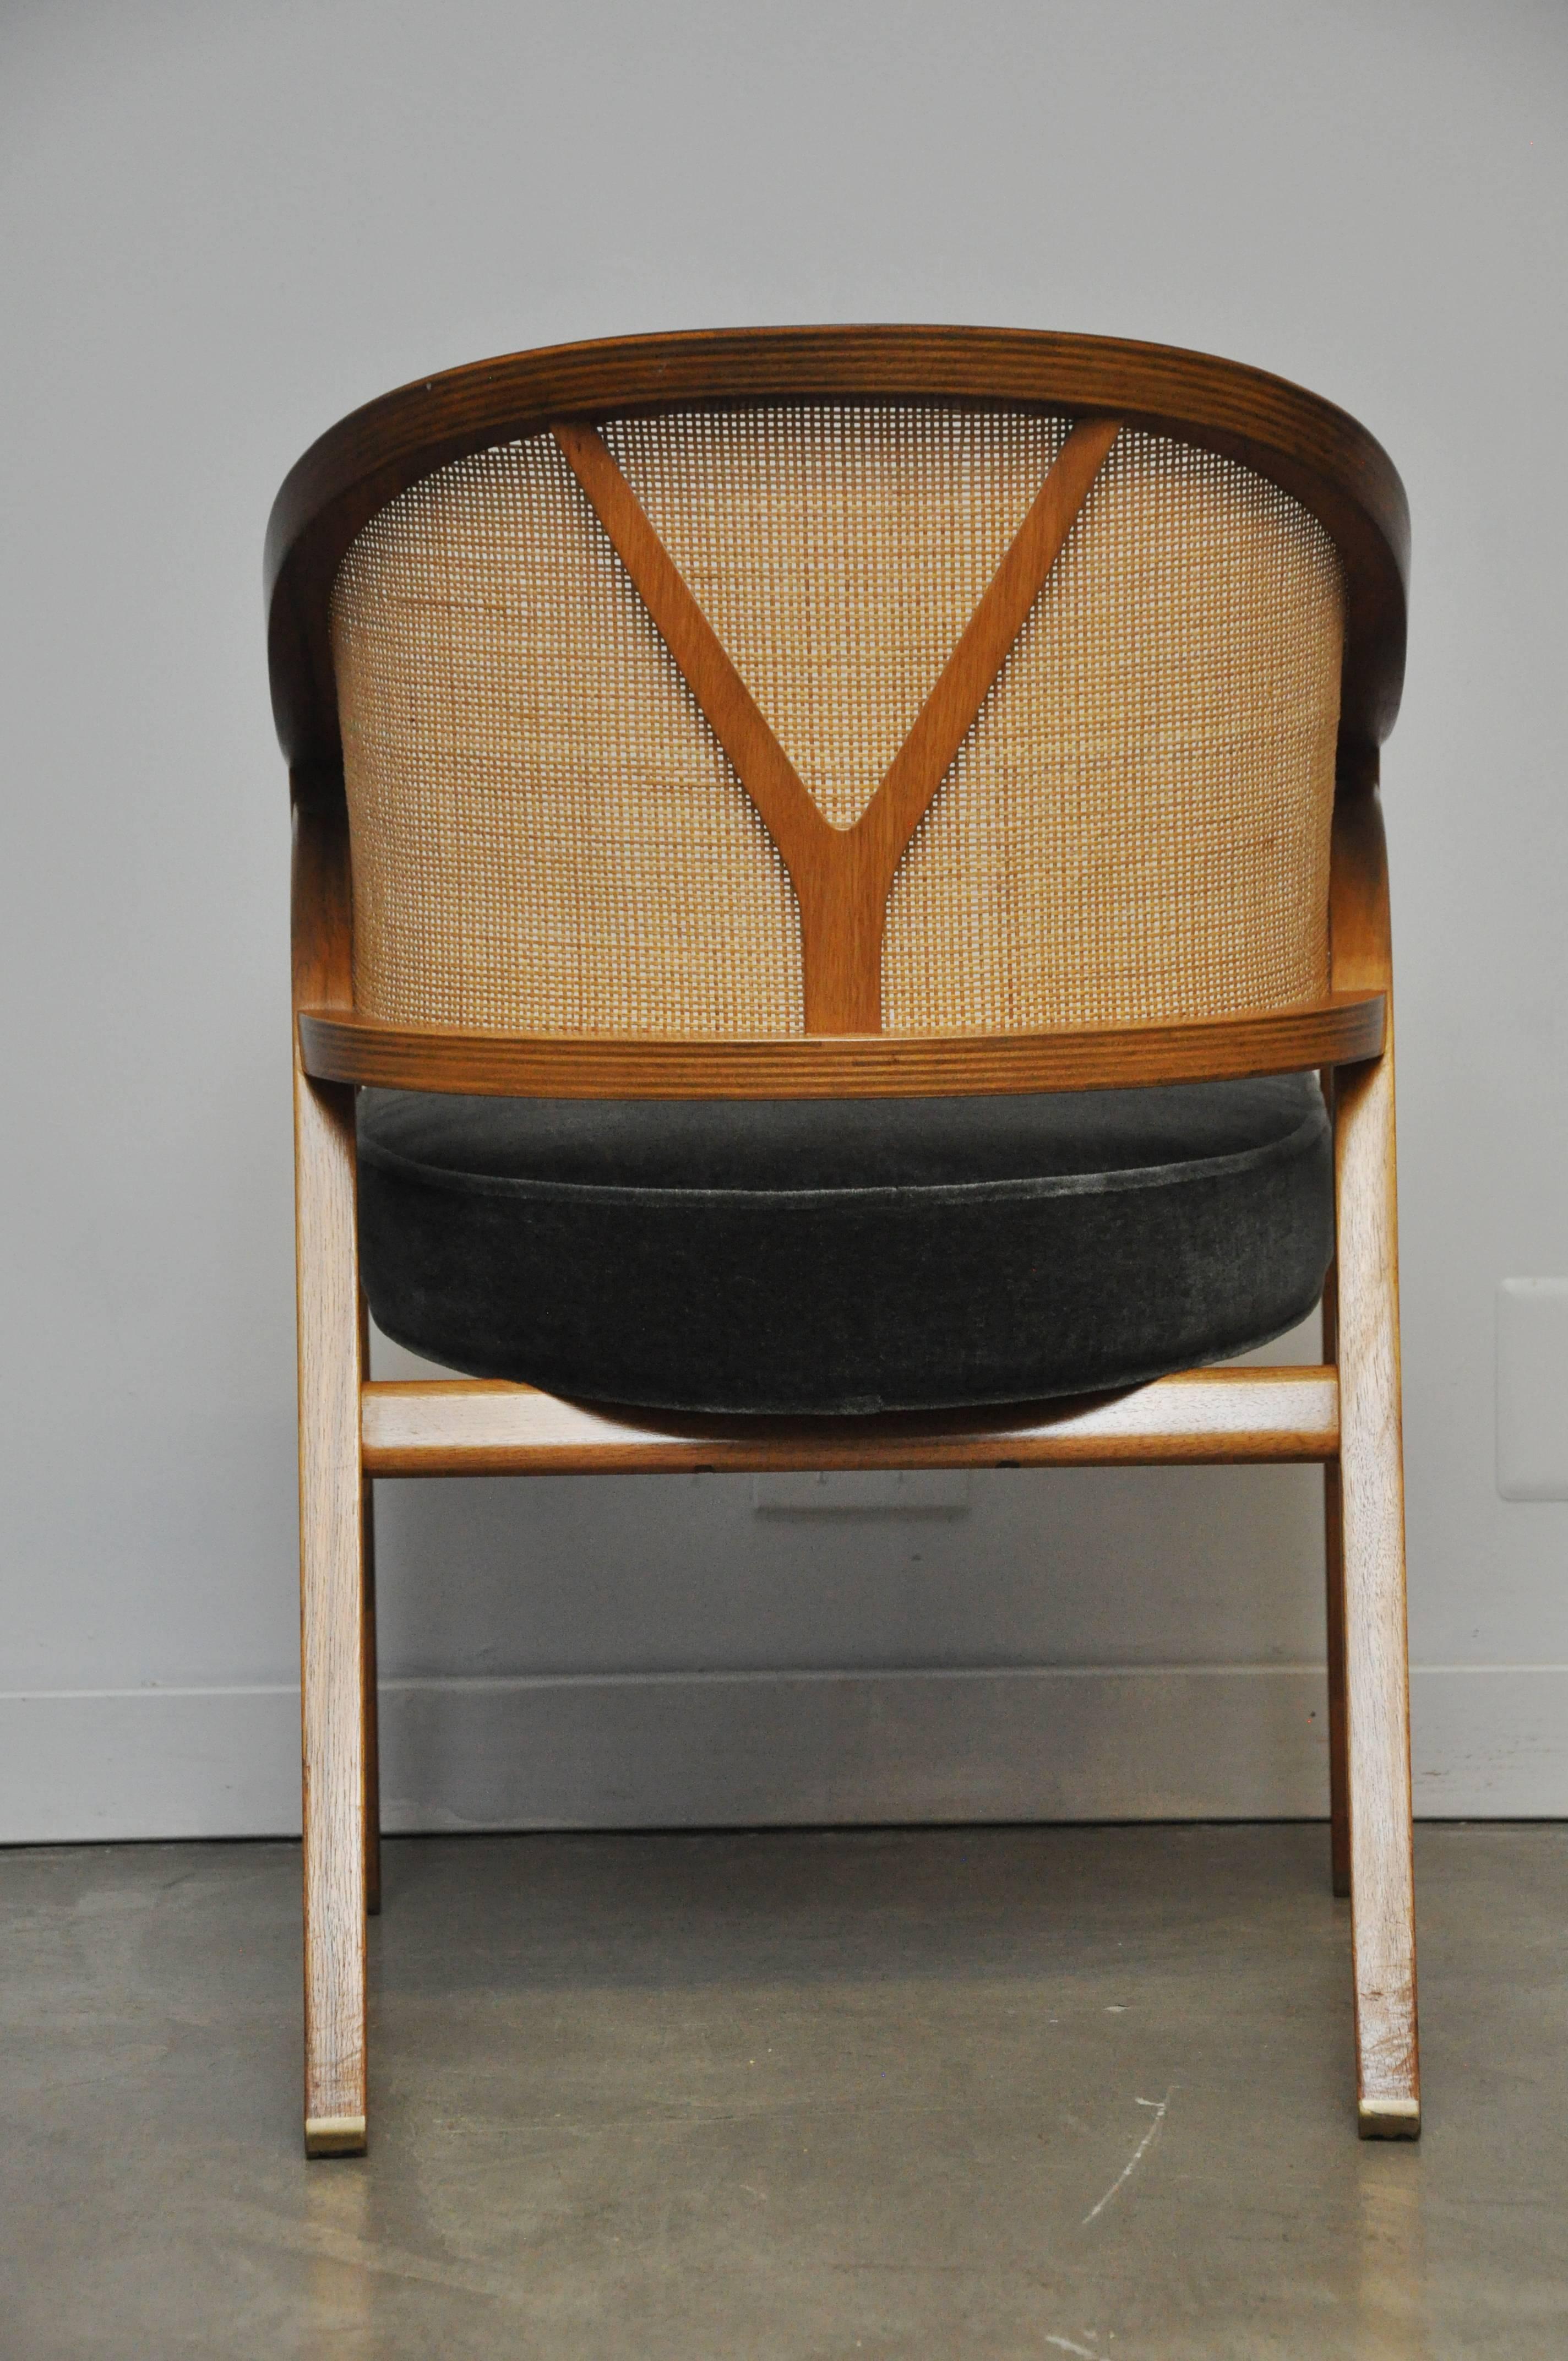 Walnut frame captain chair by Edward Wormley. Cane back with new mohair upholstery.